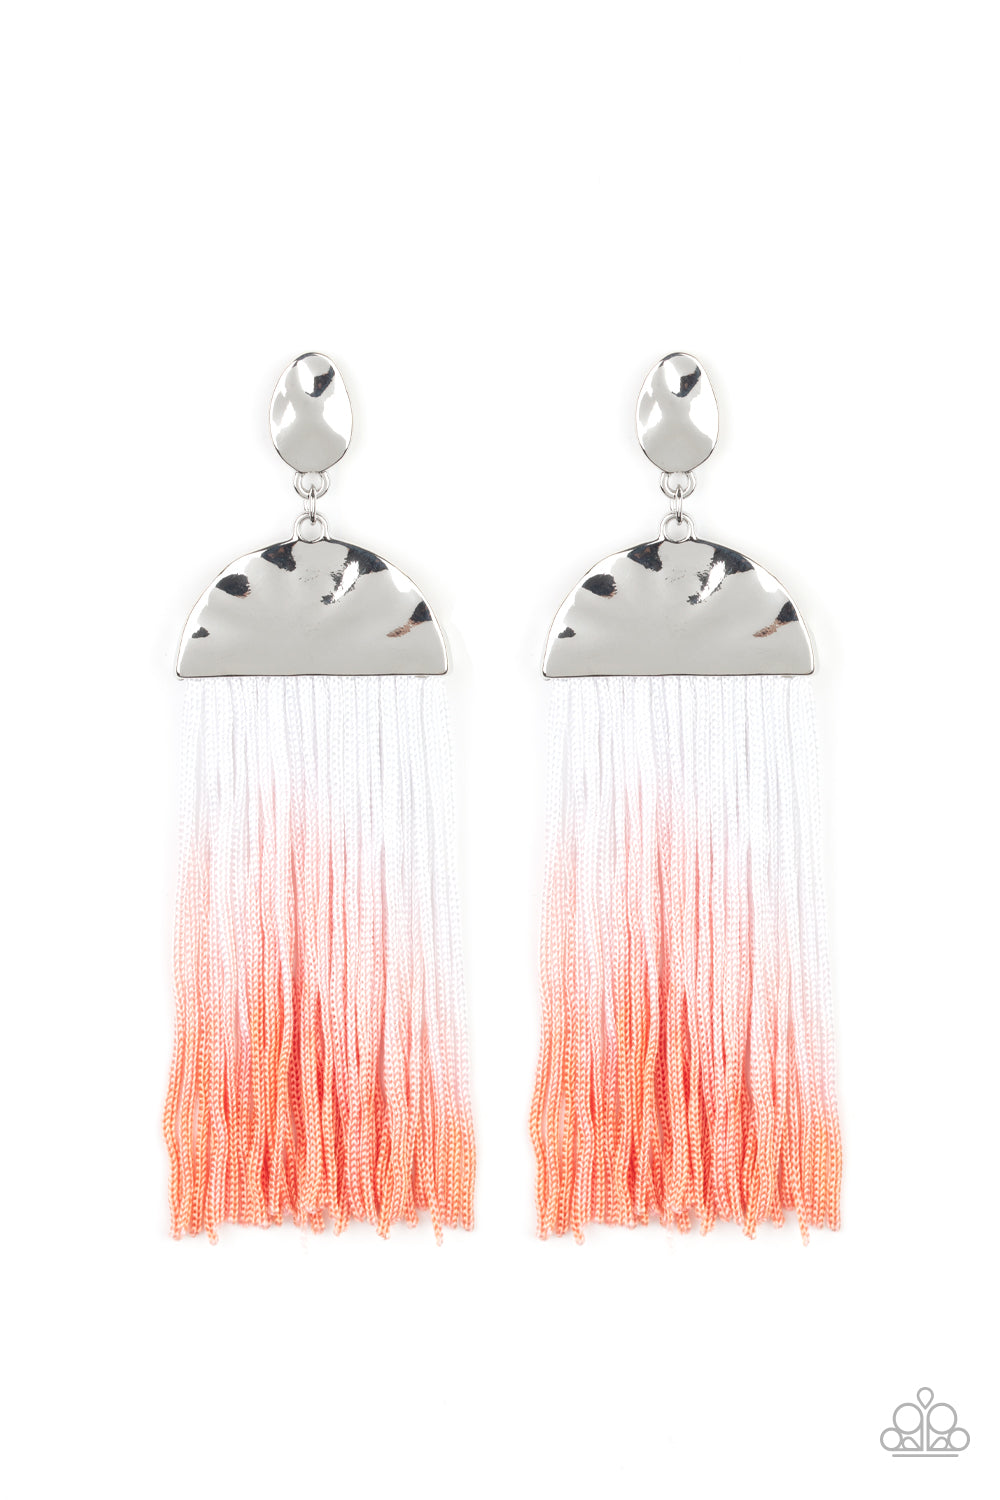 ROPE THEM IN - ORANGE AND WHITE TIE DYE DIPPED POST EARRINGS